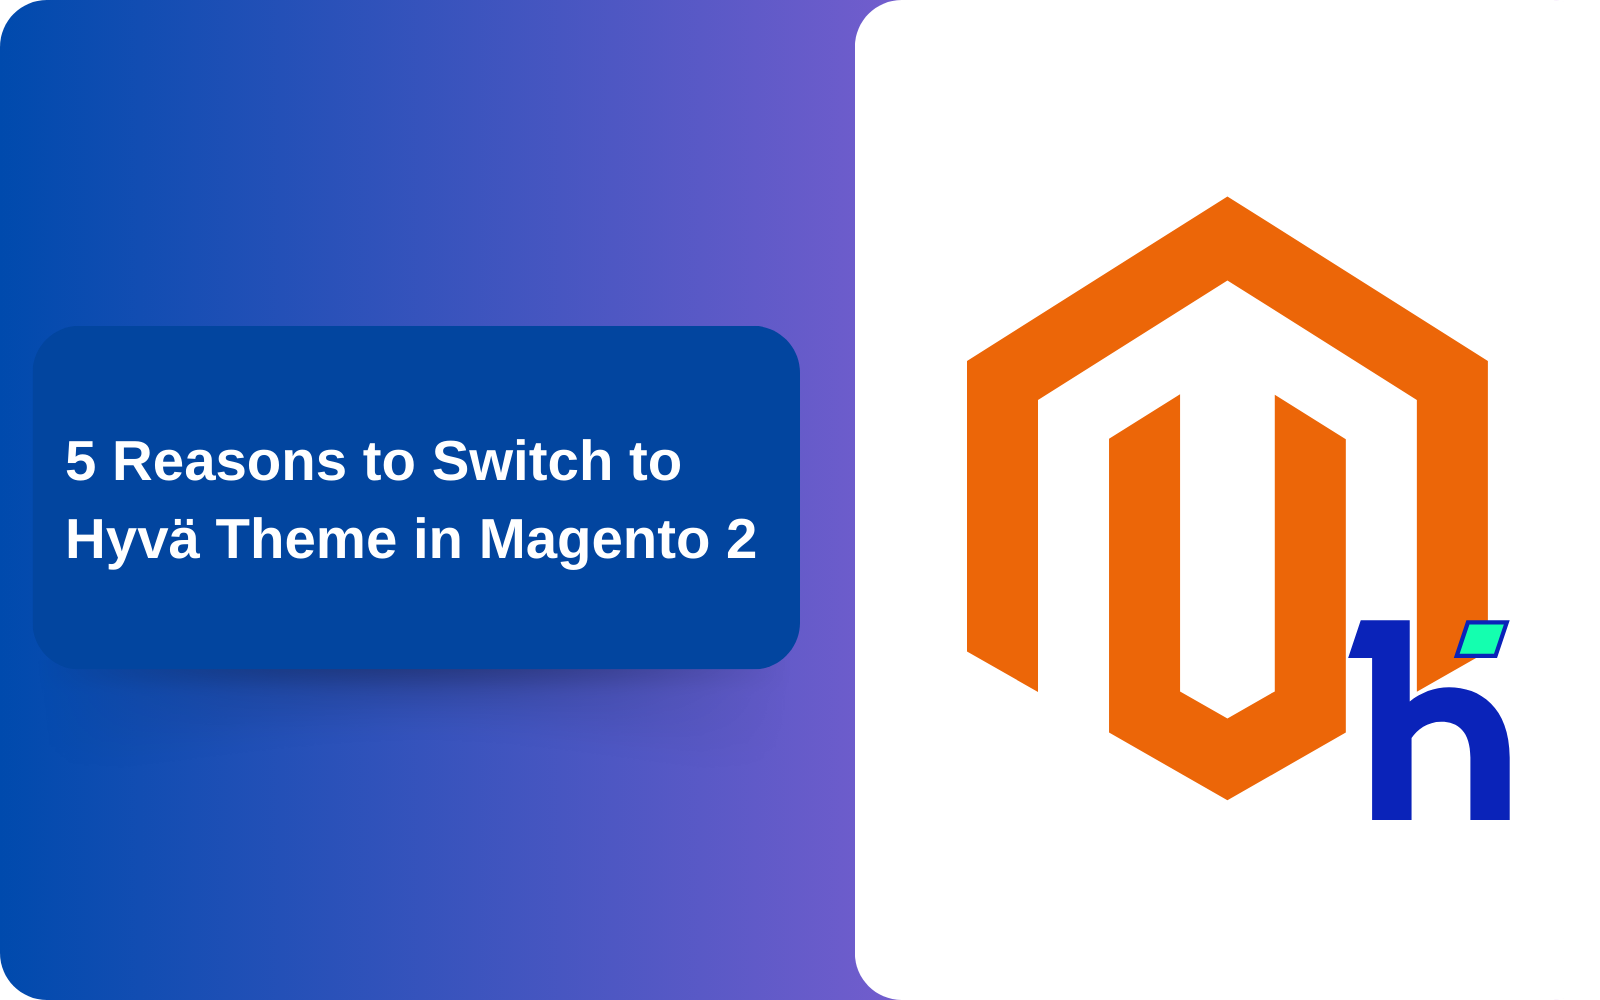 5 Reasons to Switch to Hyvä Theme in Magento 2